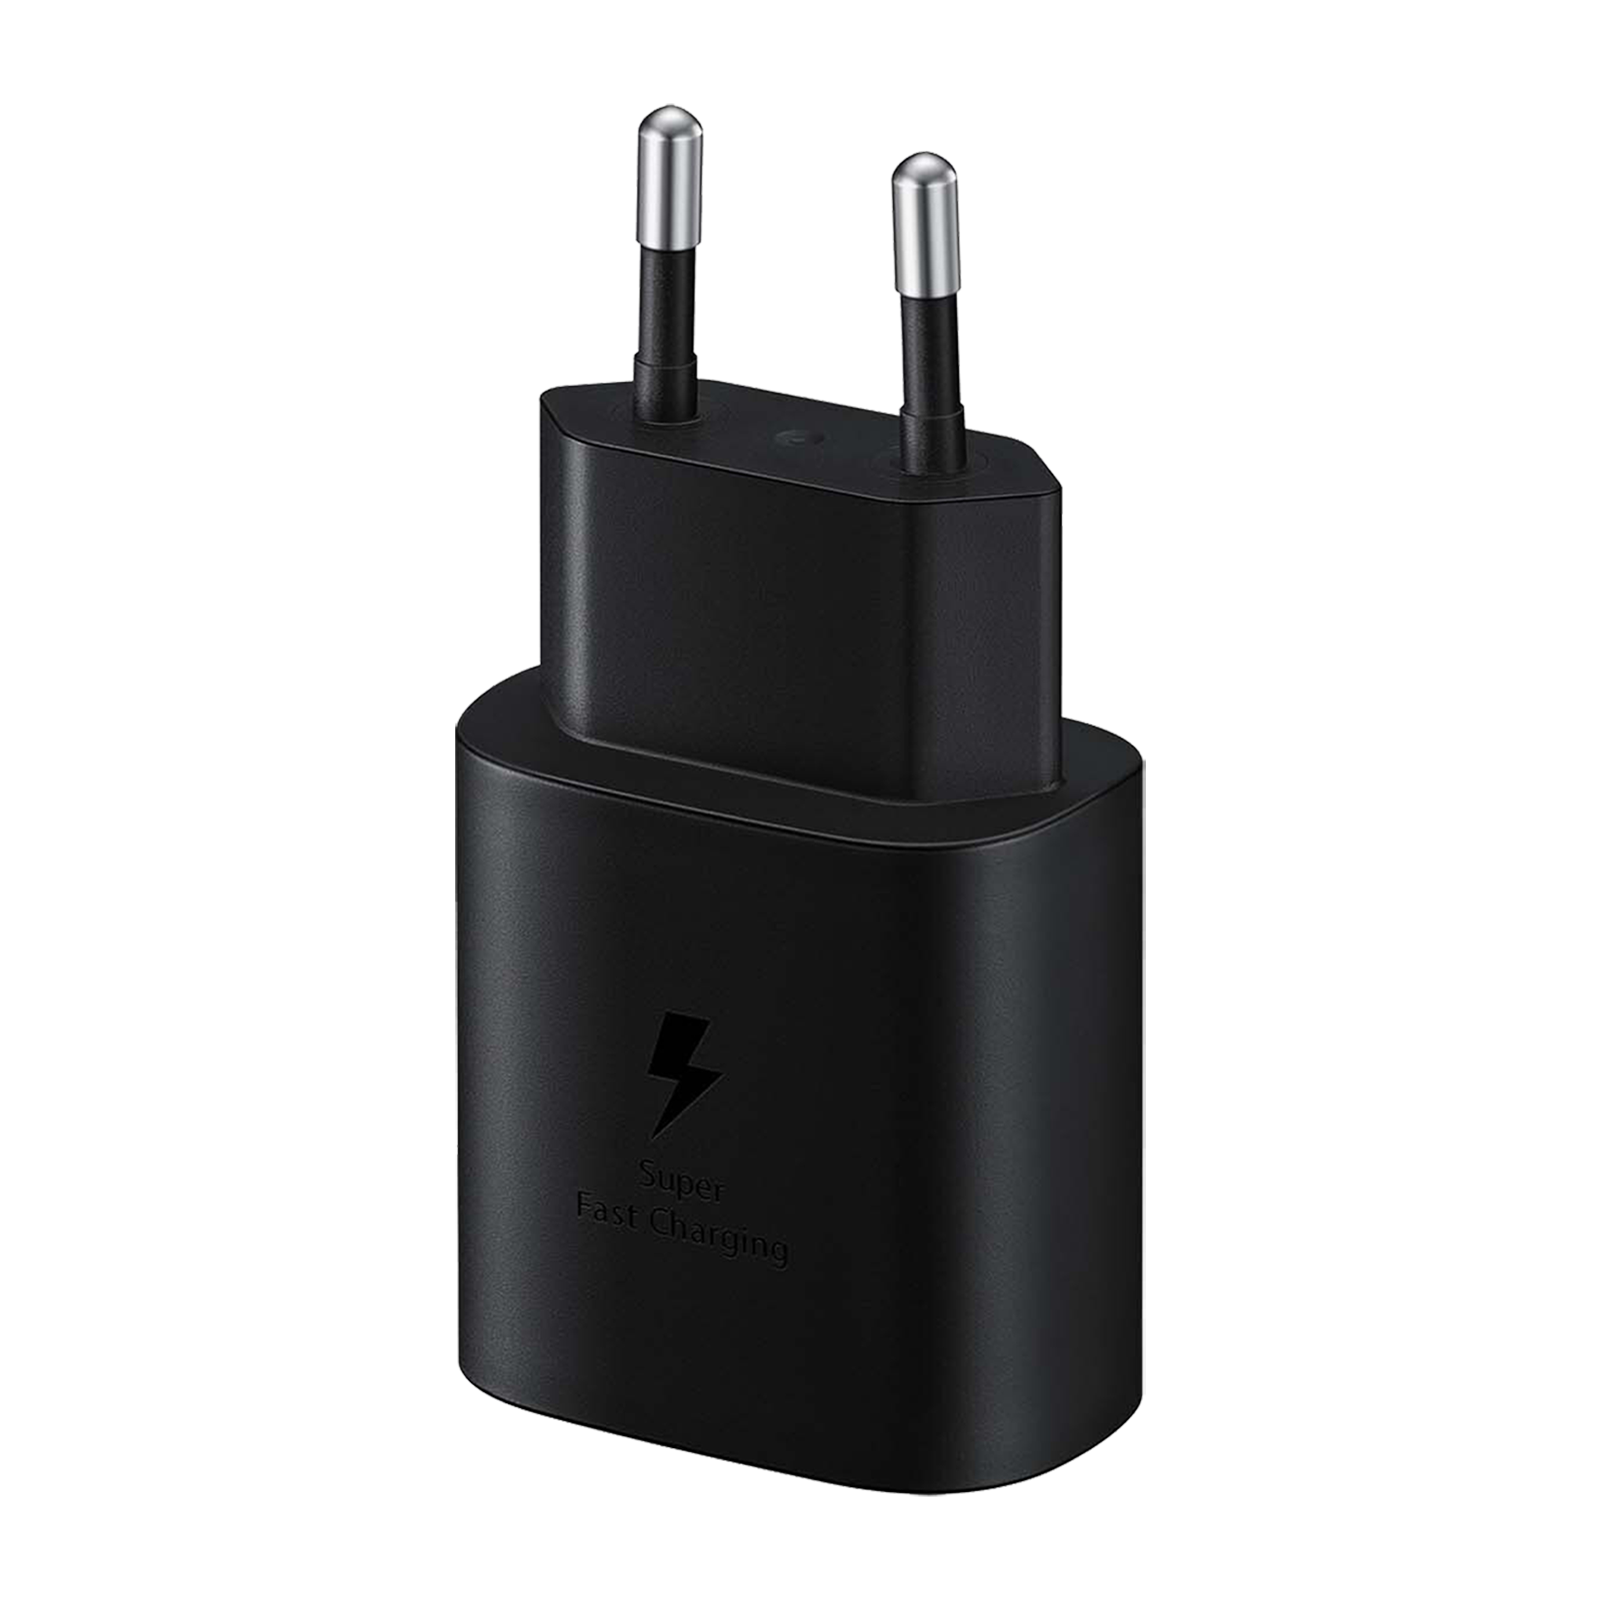 Samsung Super Fast Charger (25W) (Black) - Price